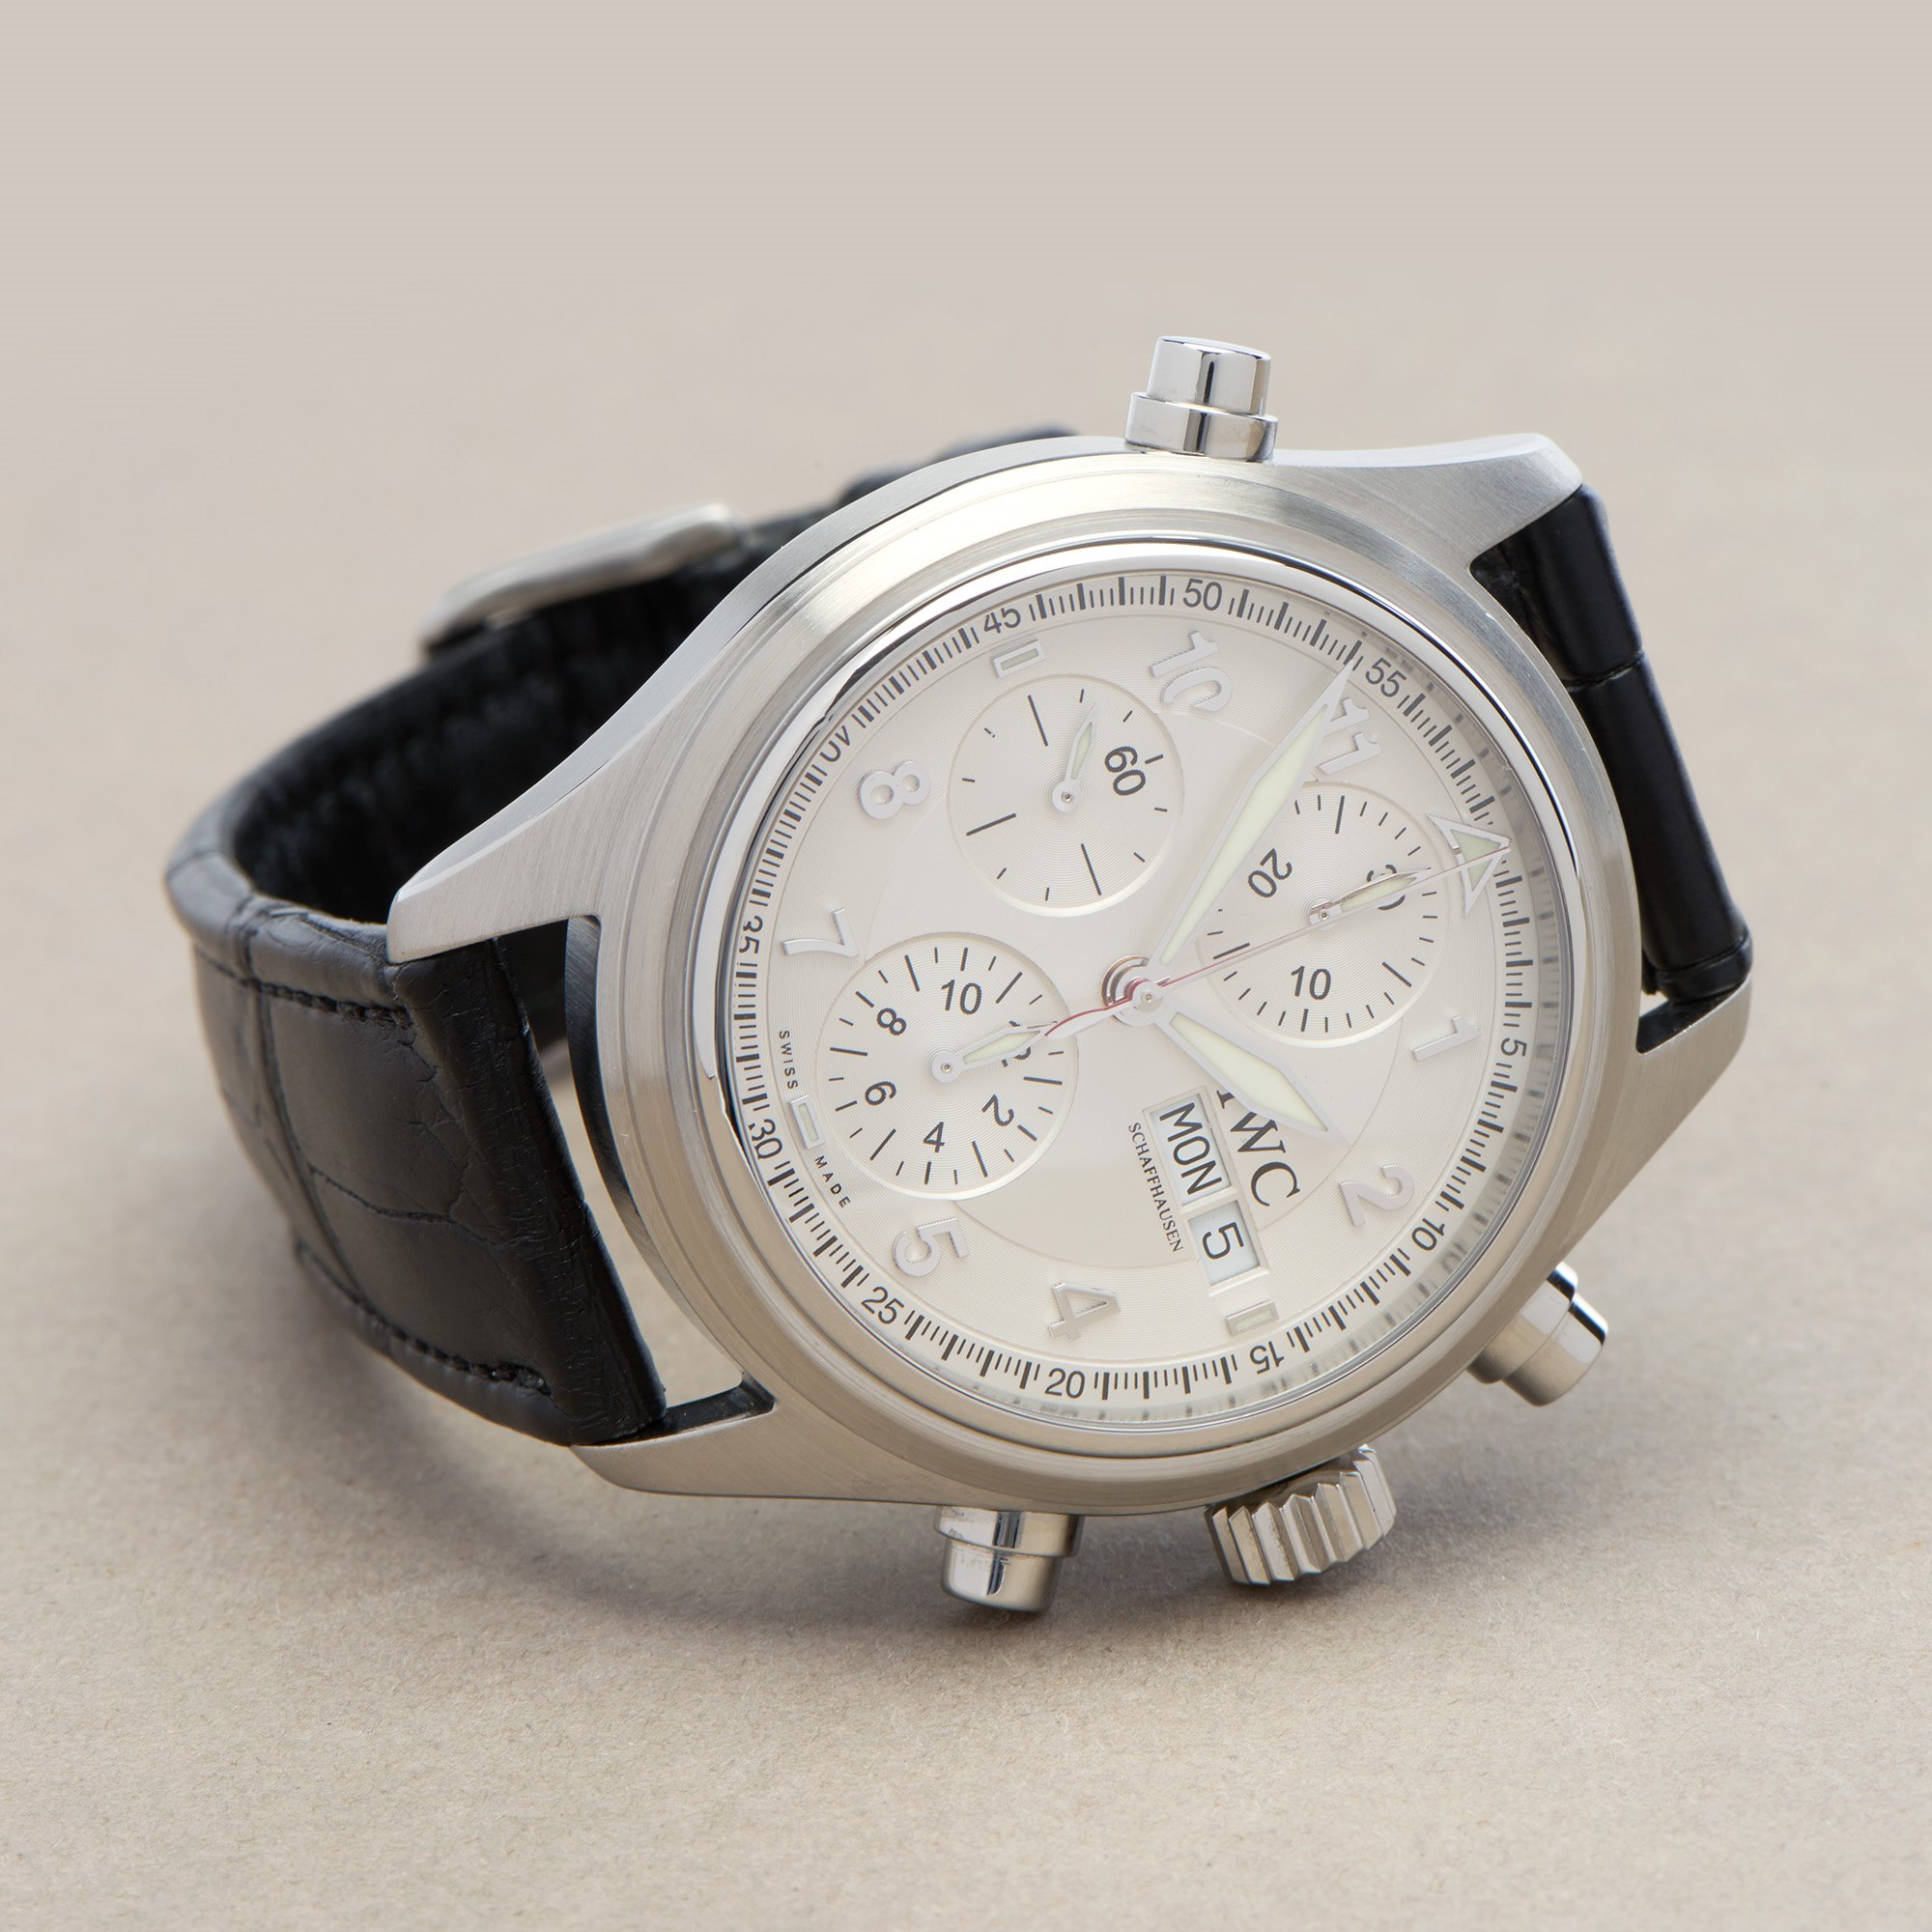 IWC Pilot's Chronograph Spitfire Double Chronograph Stainless Steel IW371343